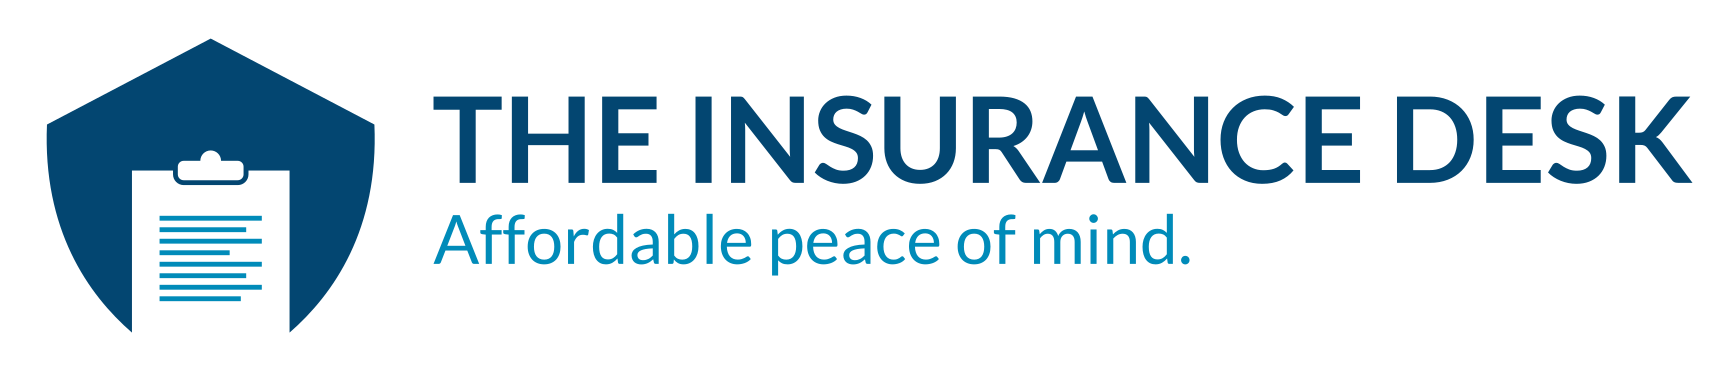 The Insurance Desk. Affordable peace of mind. 